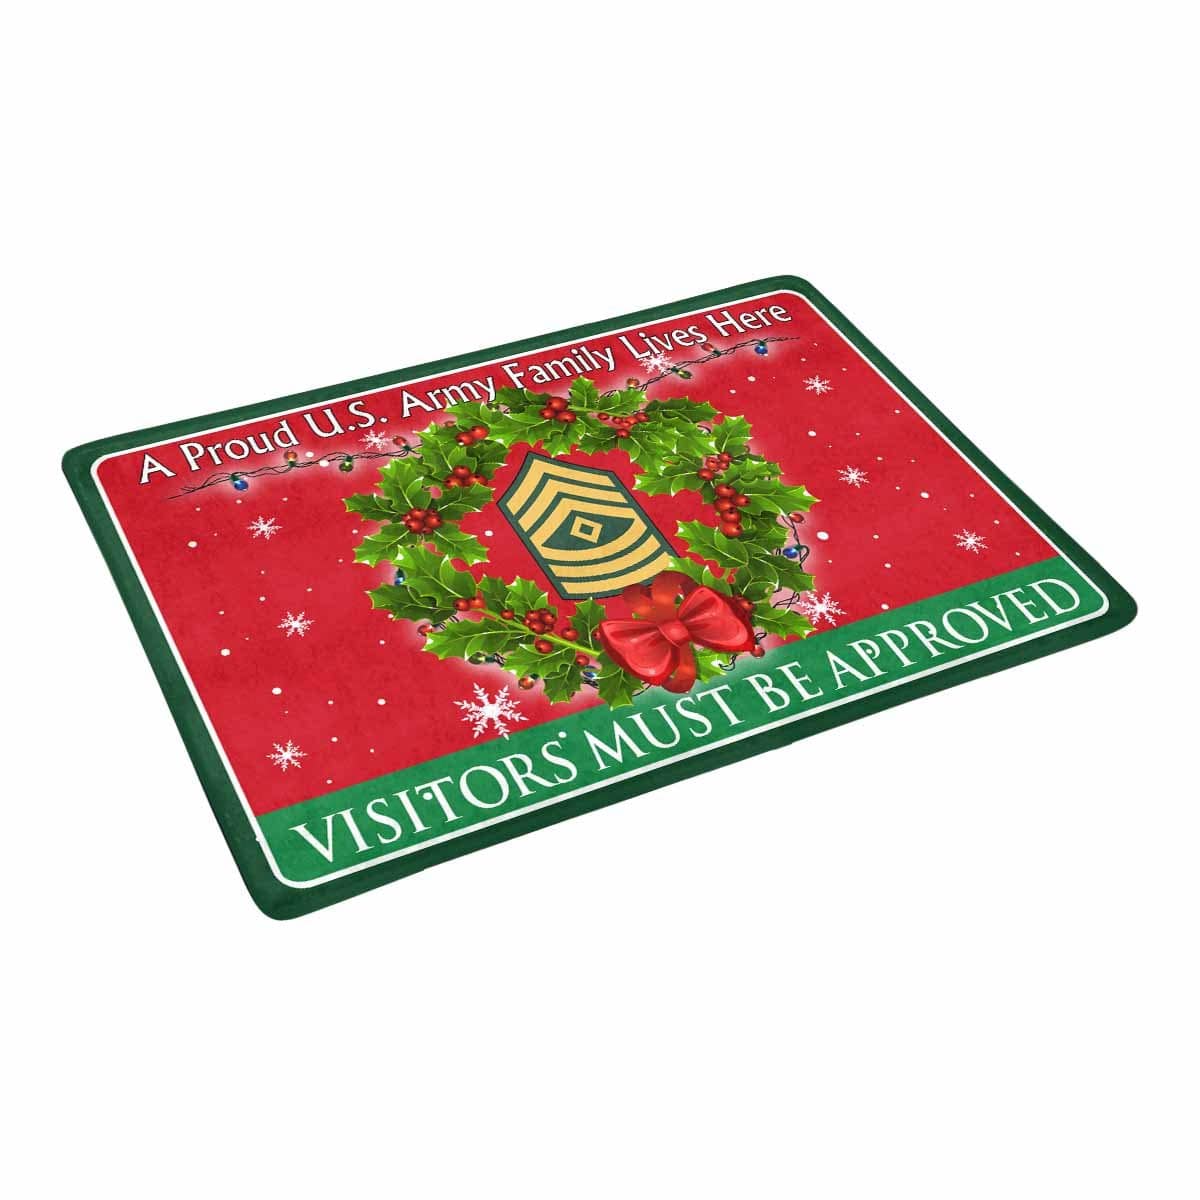 US Army E-8 First Sergeant E8 1SG Noncommissioned Officer Ranks - Visitors must be approved Christmas Doormat-Doormat-Army-Ranks-Veterans Nation